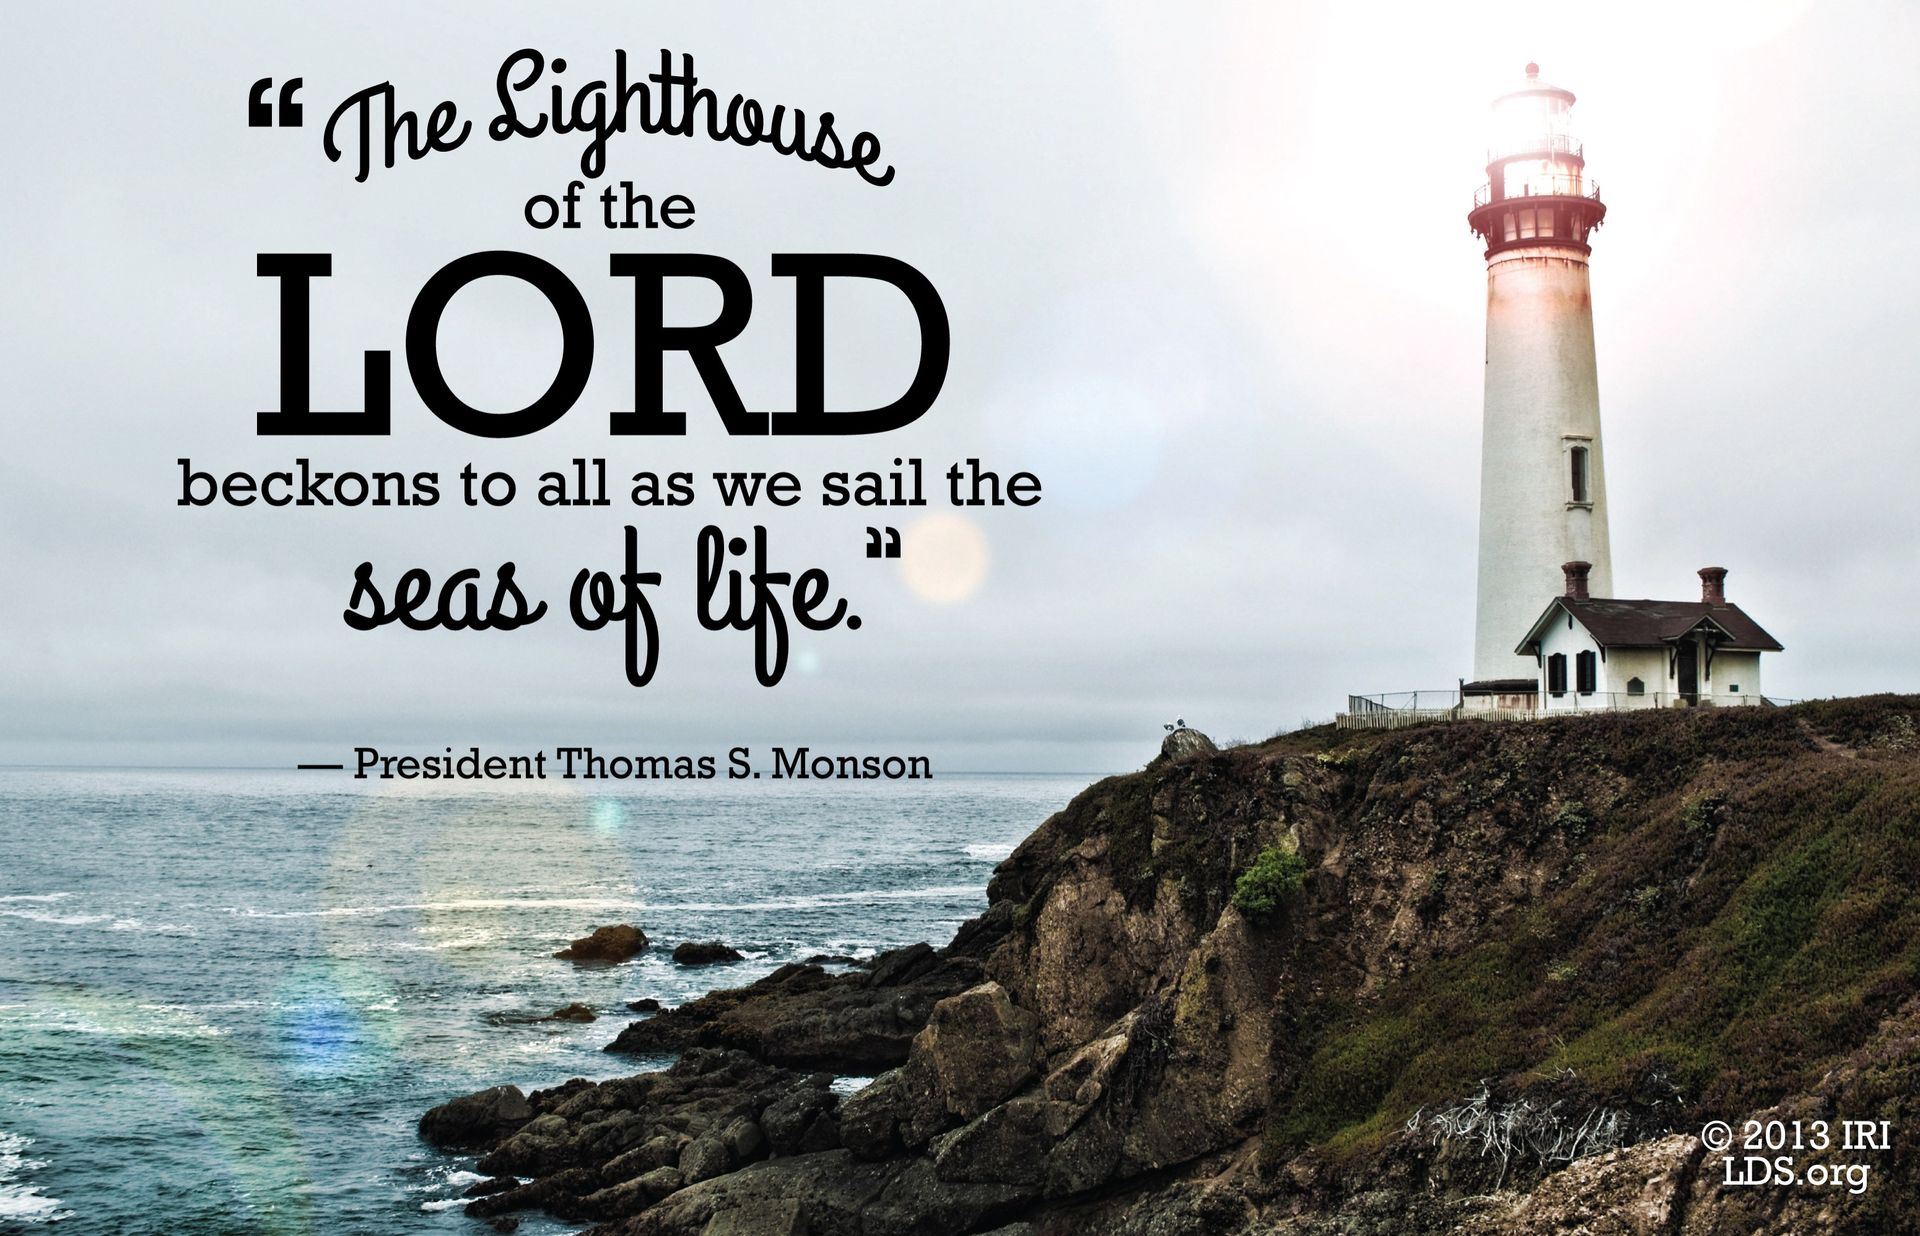 “The lighthouse of the Lord beckons to all as we sail the seas of life.”—President Thomas S. Monson, “Sailing Safely the Seas of Life” © undefined ipCode 1.